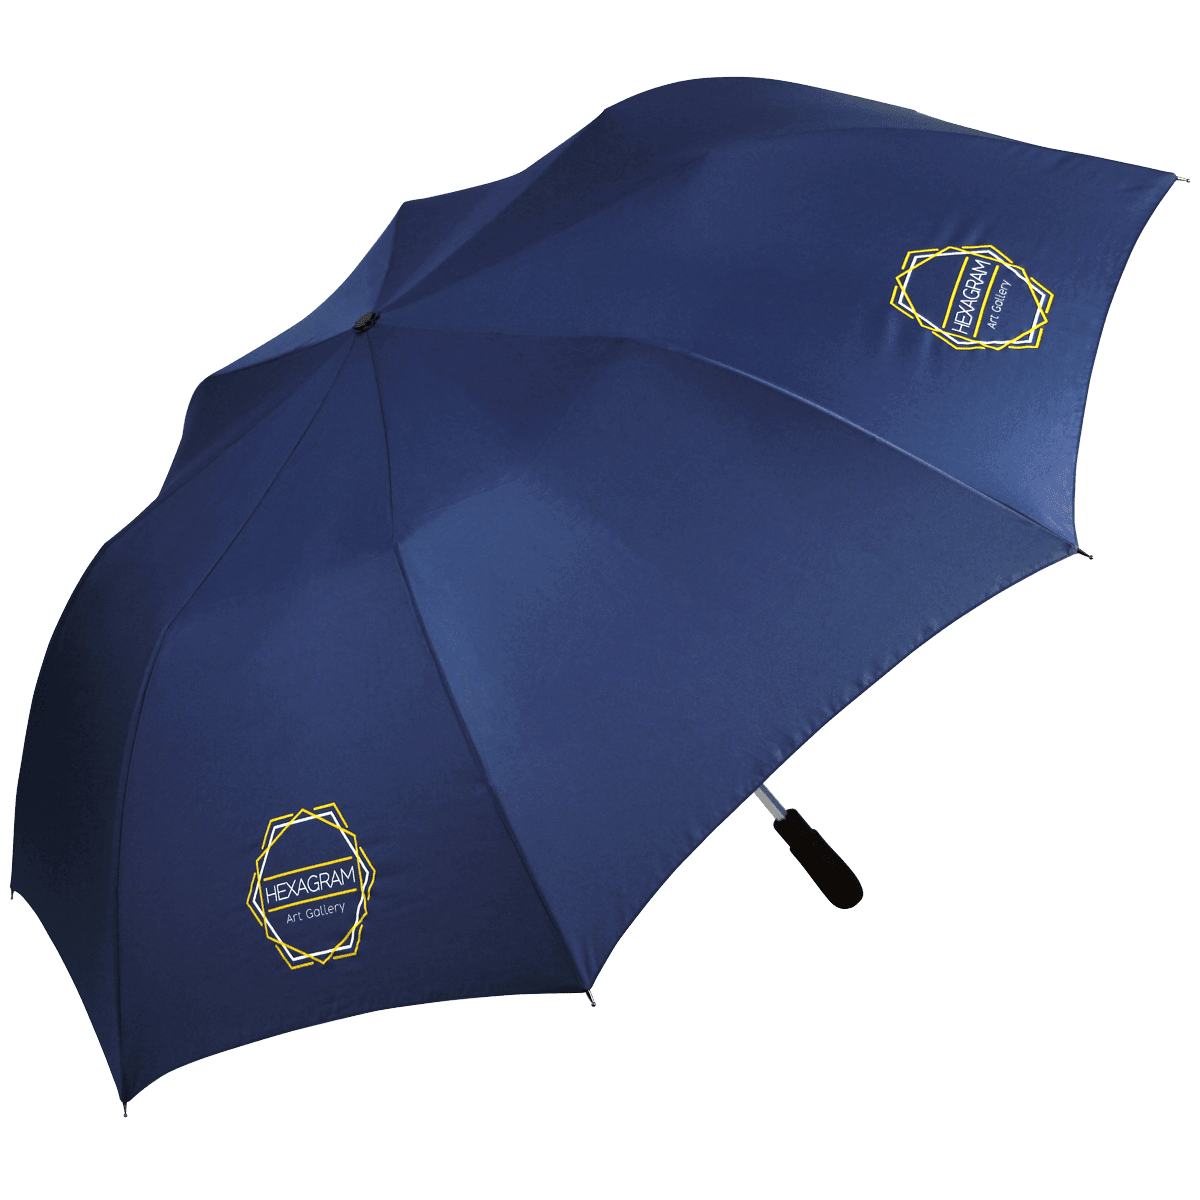 Promo Max Umbrella - Promotions Only Group Limited